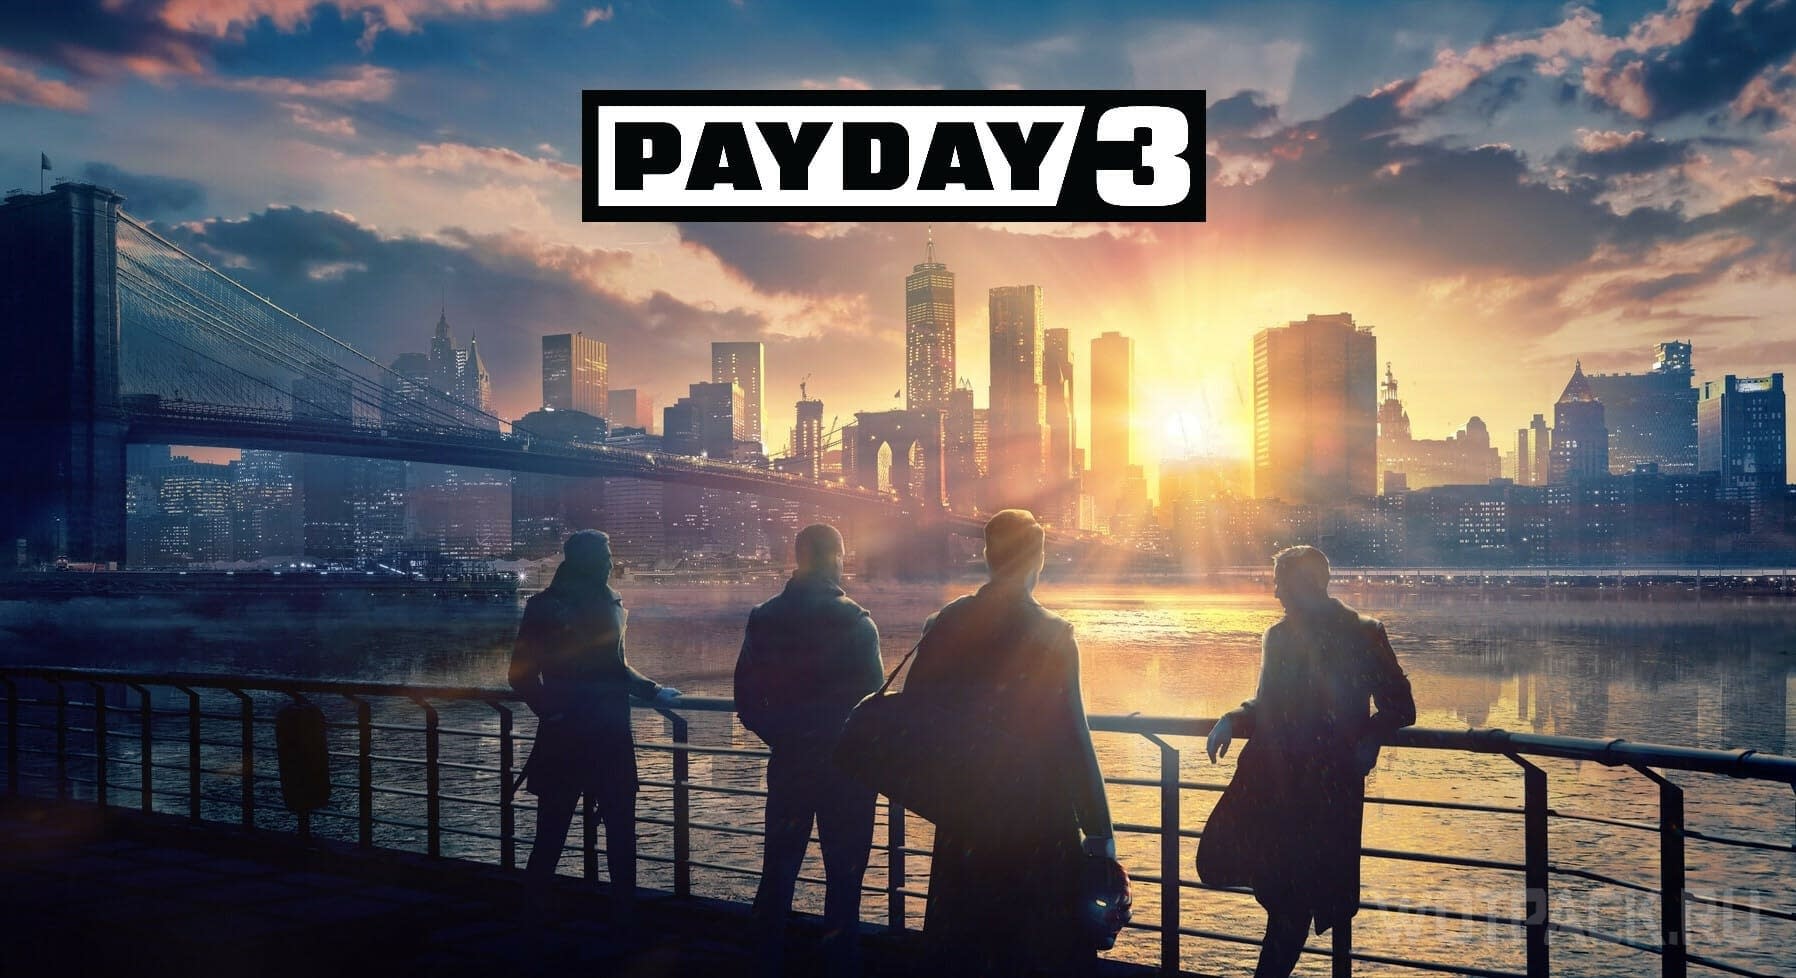 New Fragman Released Show Payday 3 “Privacy Mechanics”